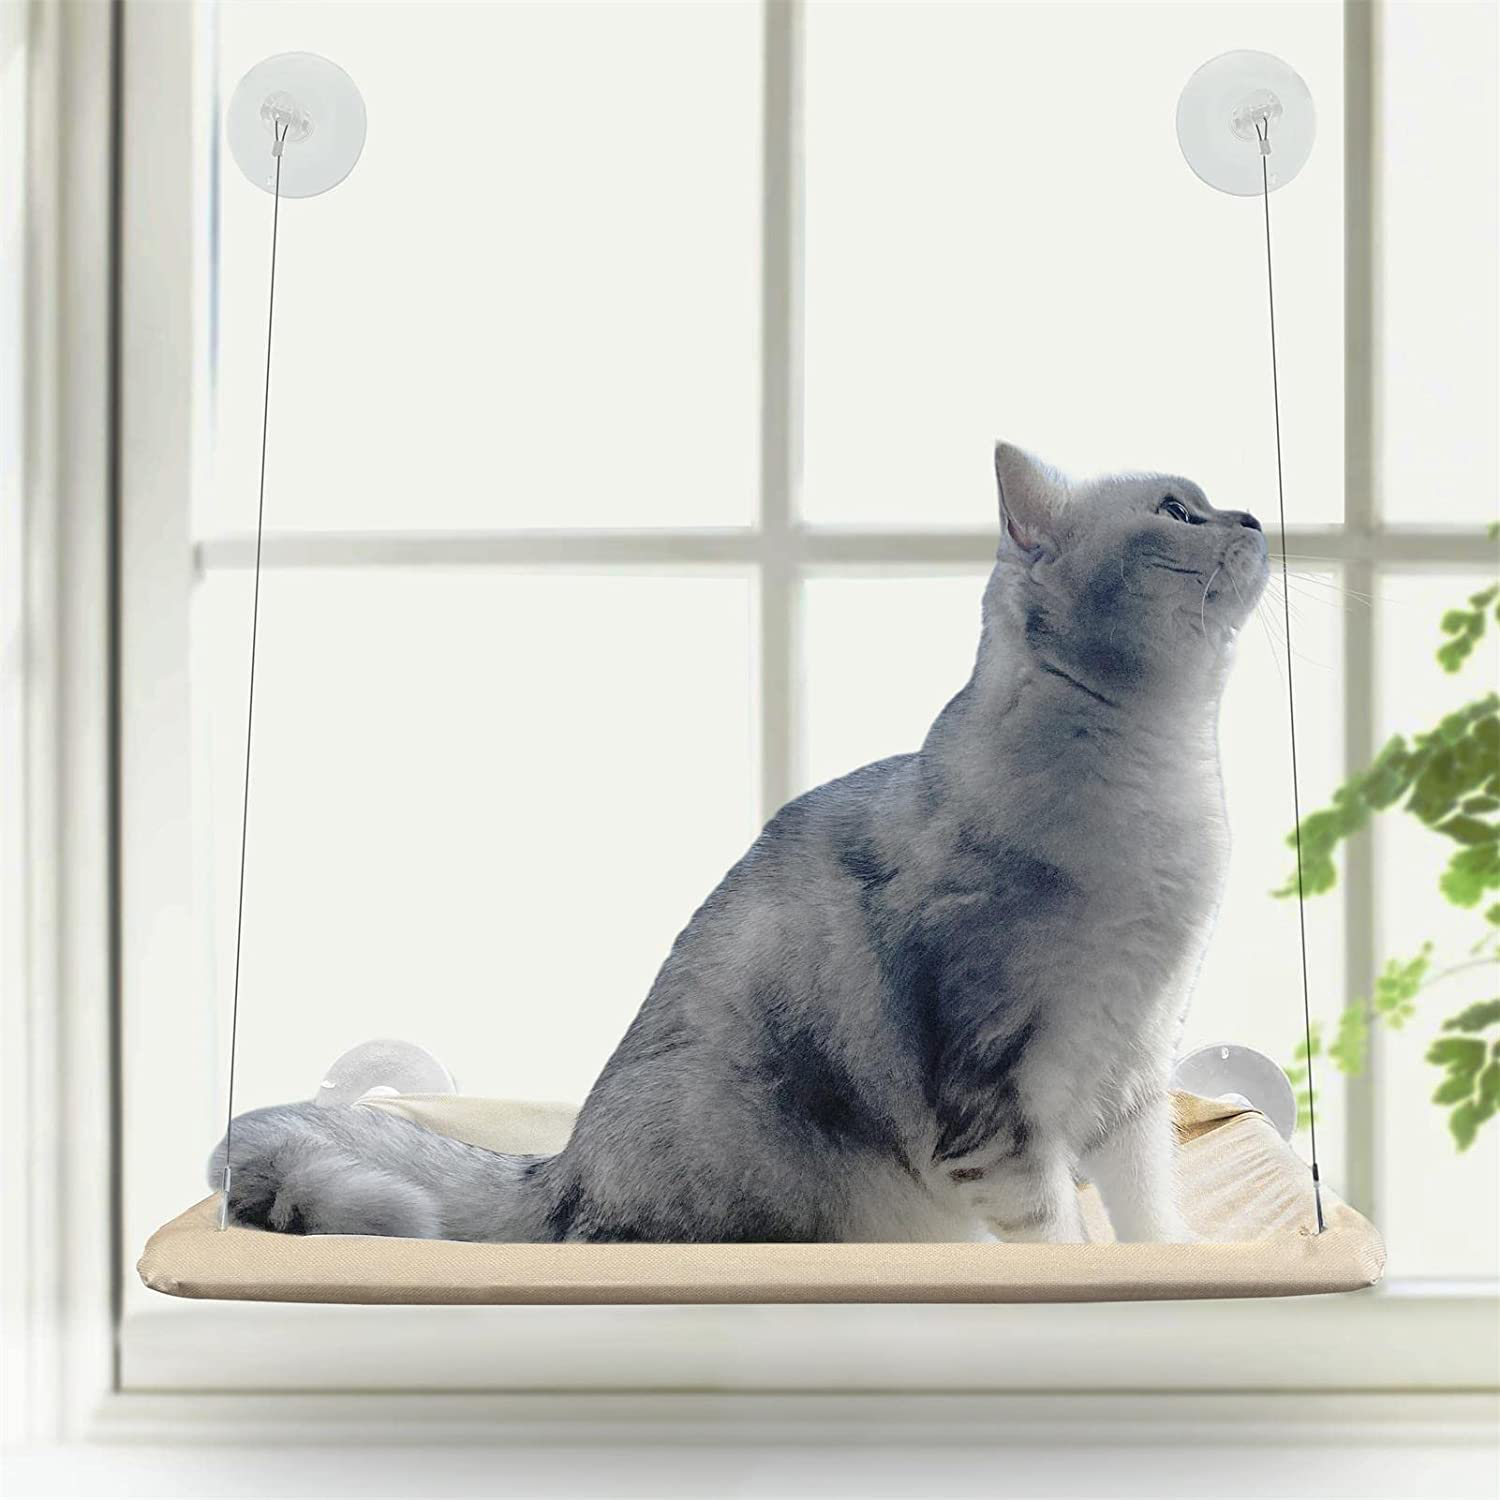 PETPAWJOY Cat Bed, Cat Window Perch Window Seat Suction Cups Space Saving Cat Hammock Pet Resting Seat Safety Cat Shelves - Providing All around 360° Sunbath for Cats Weightedup to 30Lb Animals & Pet Supplies > Pet Supplies > Cat Supplies > Cat Beds PETPAWJOY   